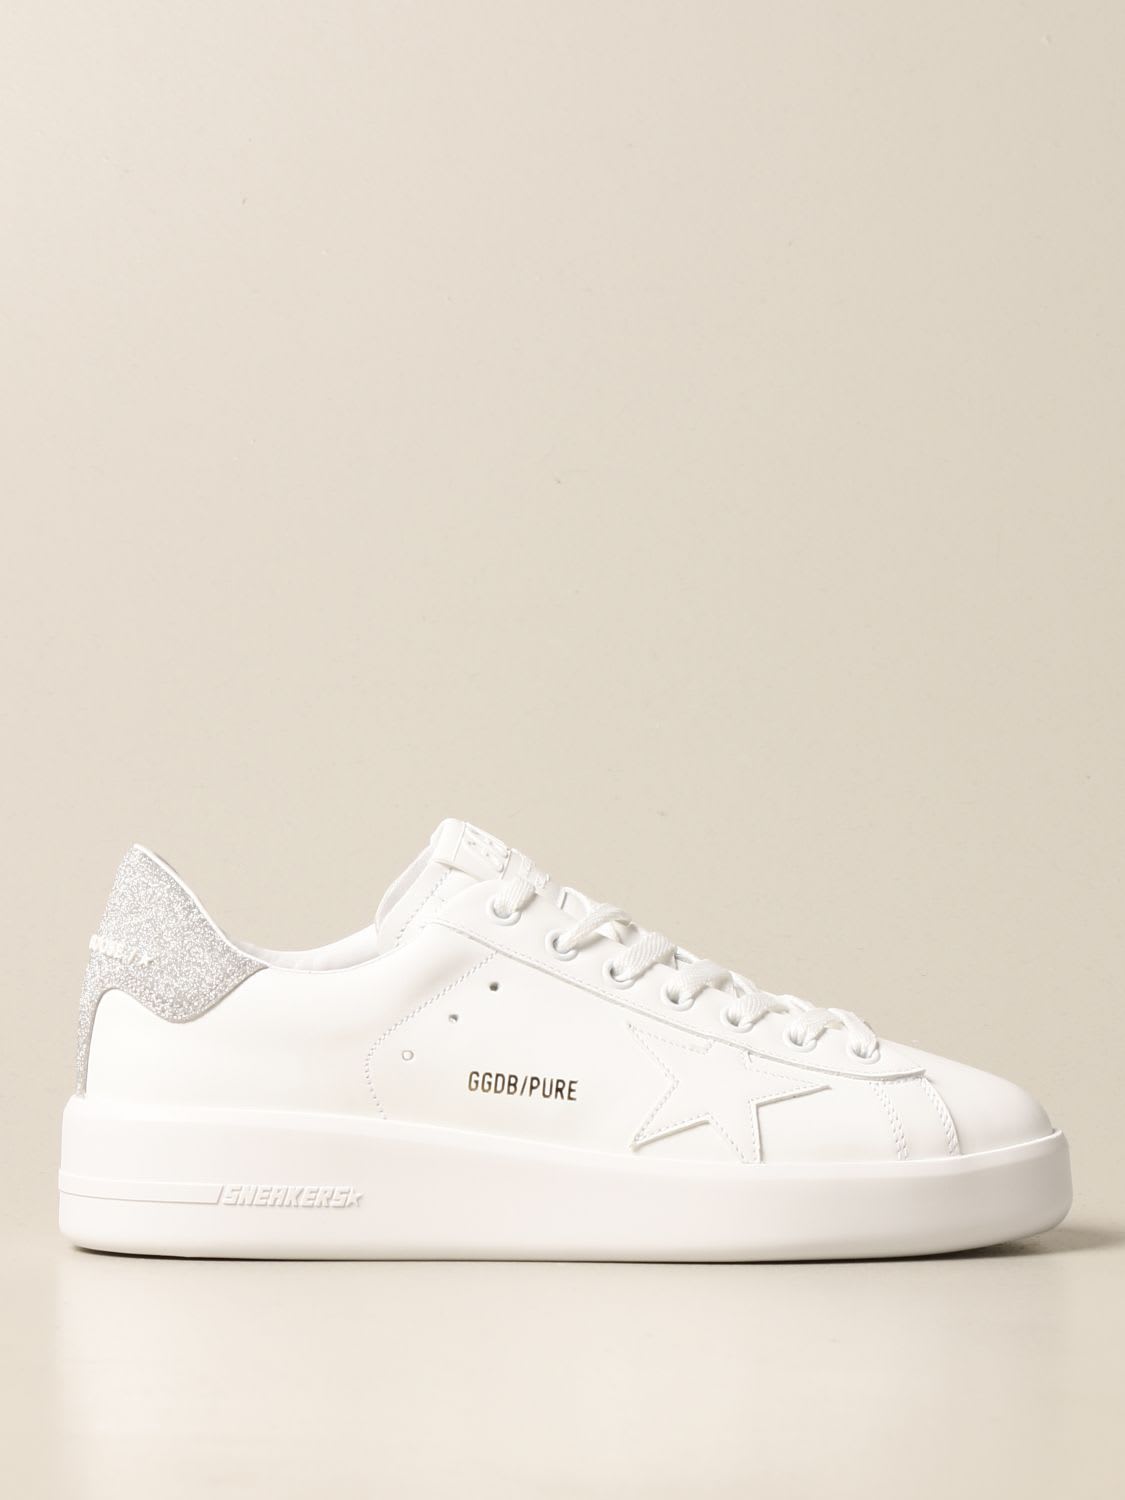 Buy Golden Goose Sneakers Pure New Golden Goose Sneakers In Leather online, shop Golden Goose shoes with free shipping